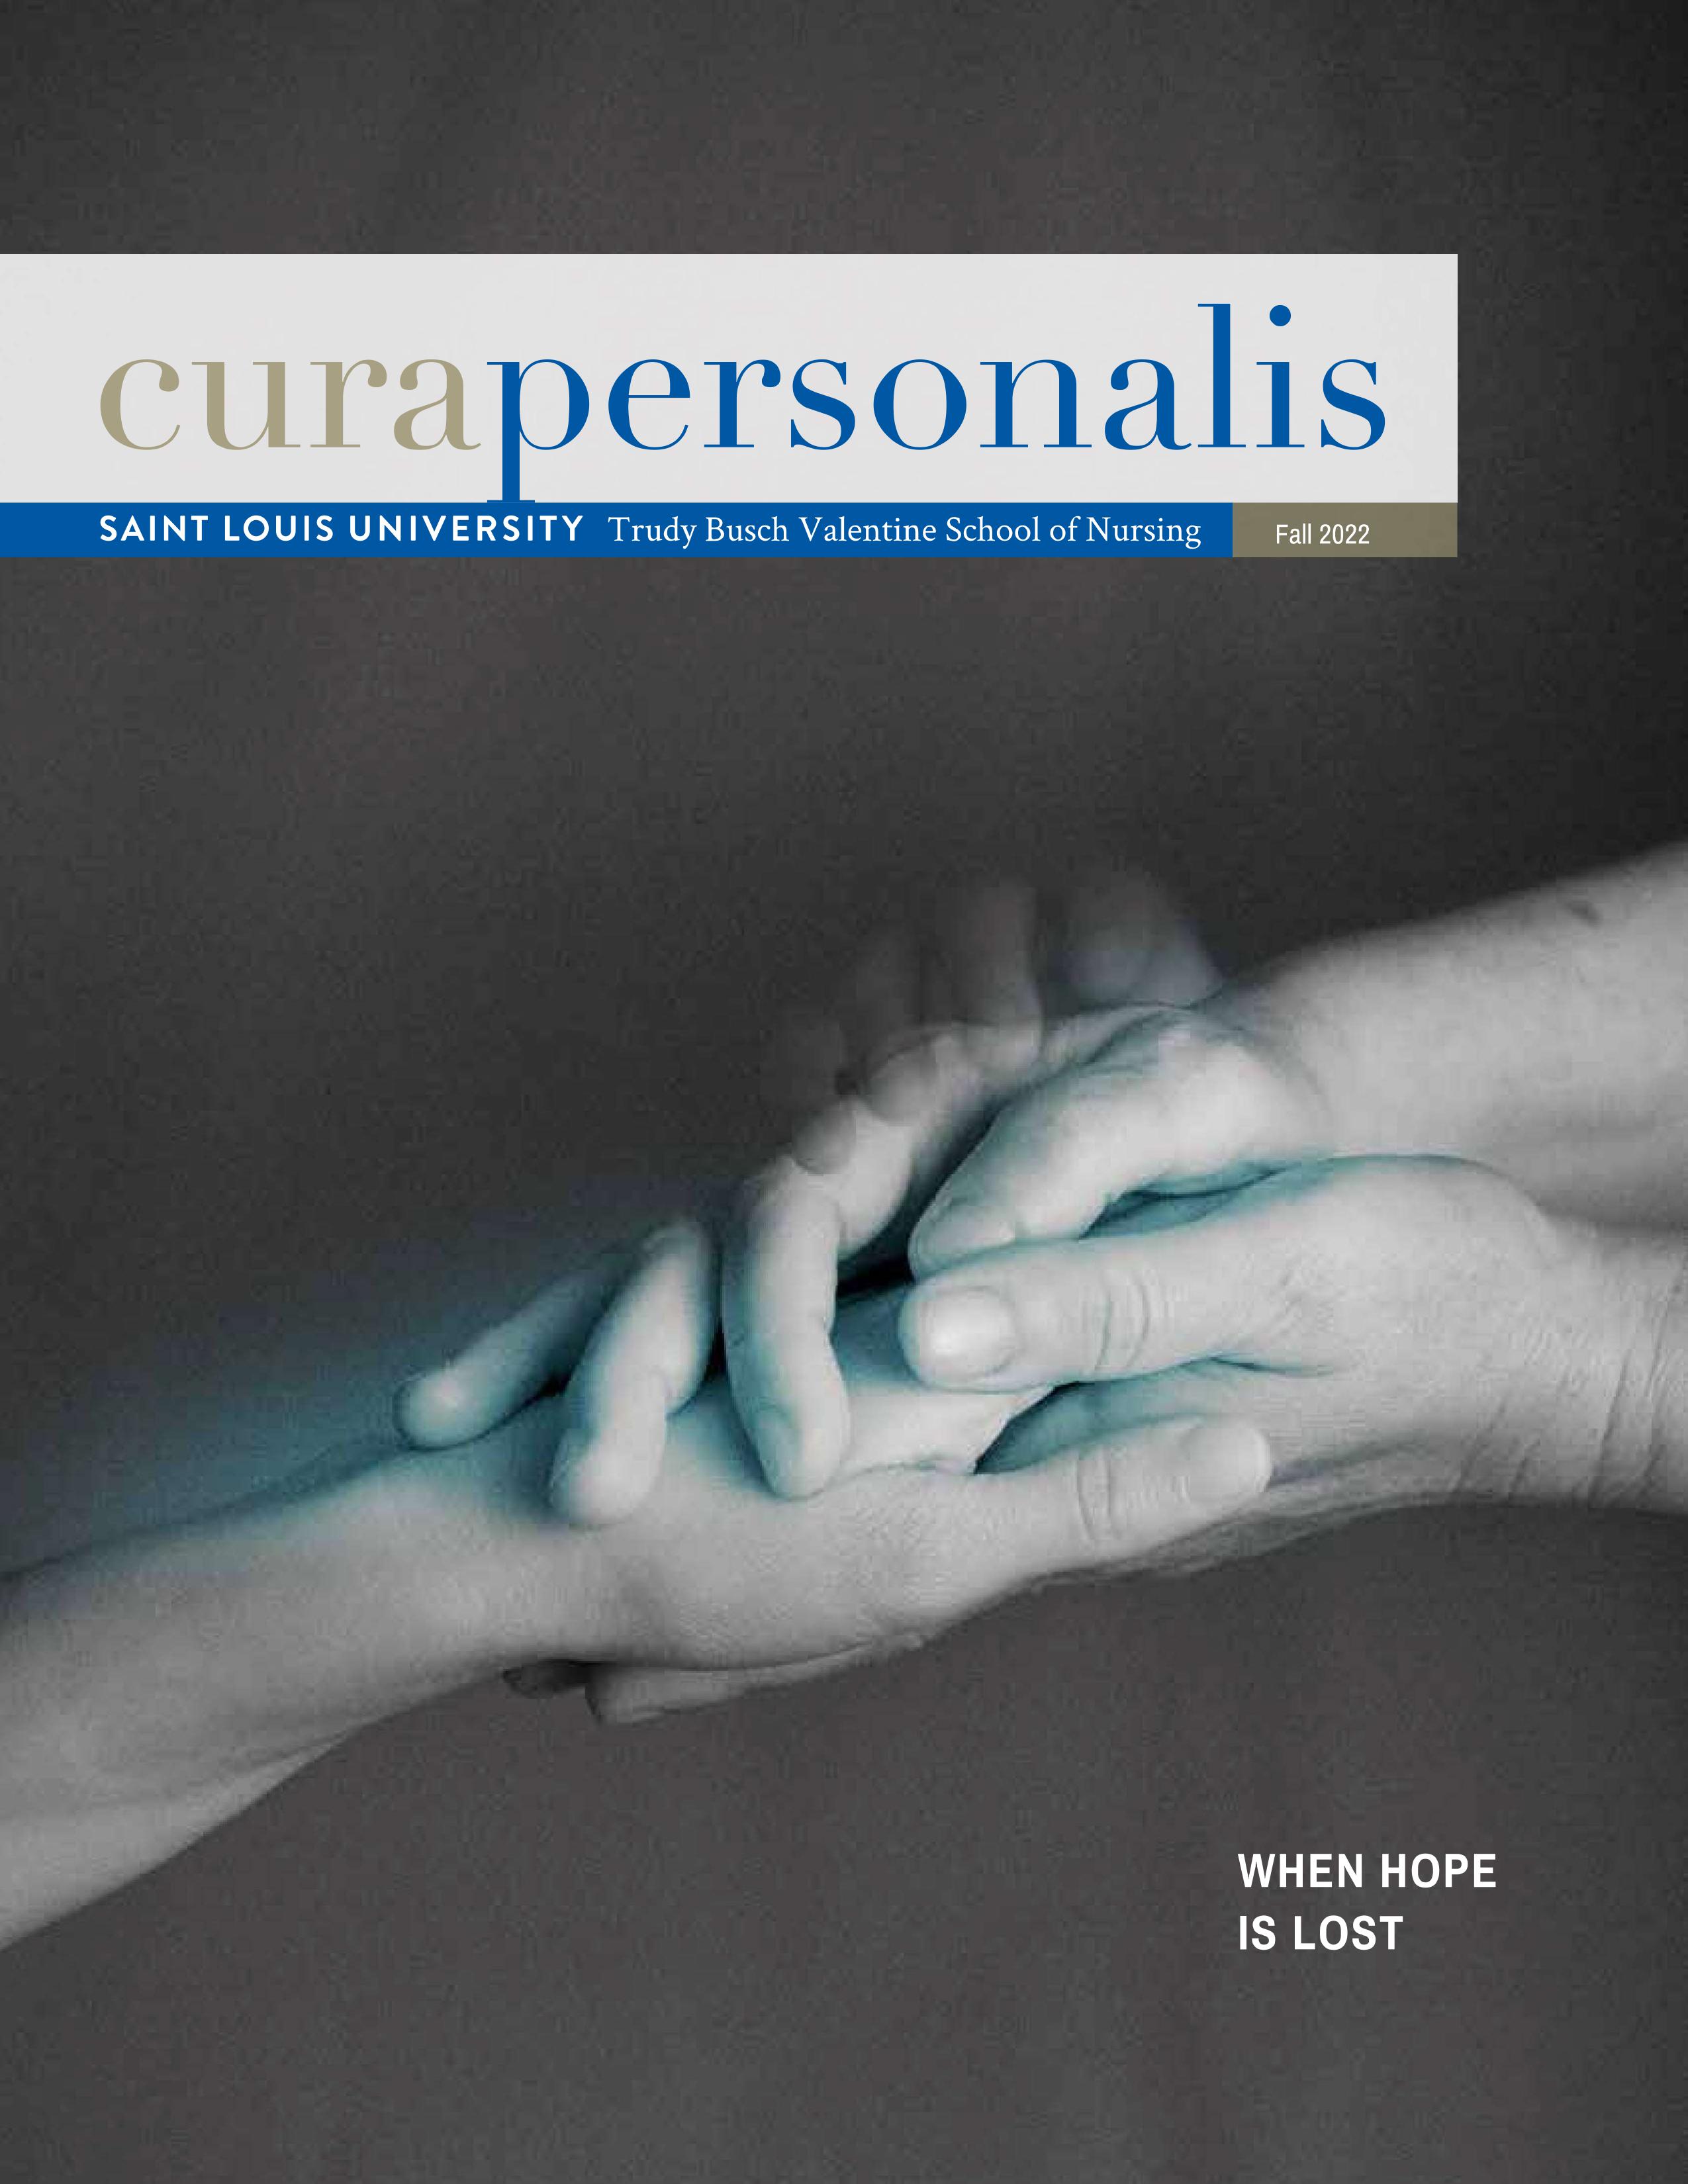 The 20121 cover of cura personlis showing a close up of hands